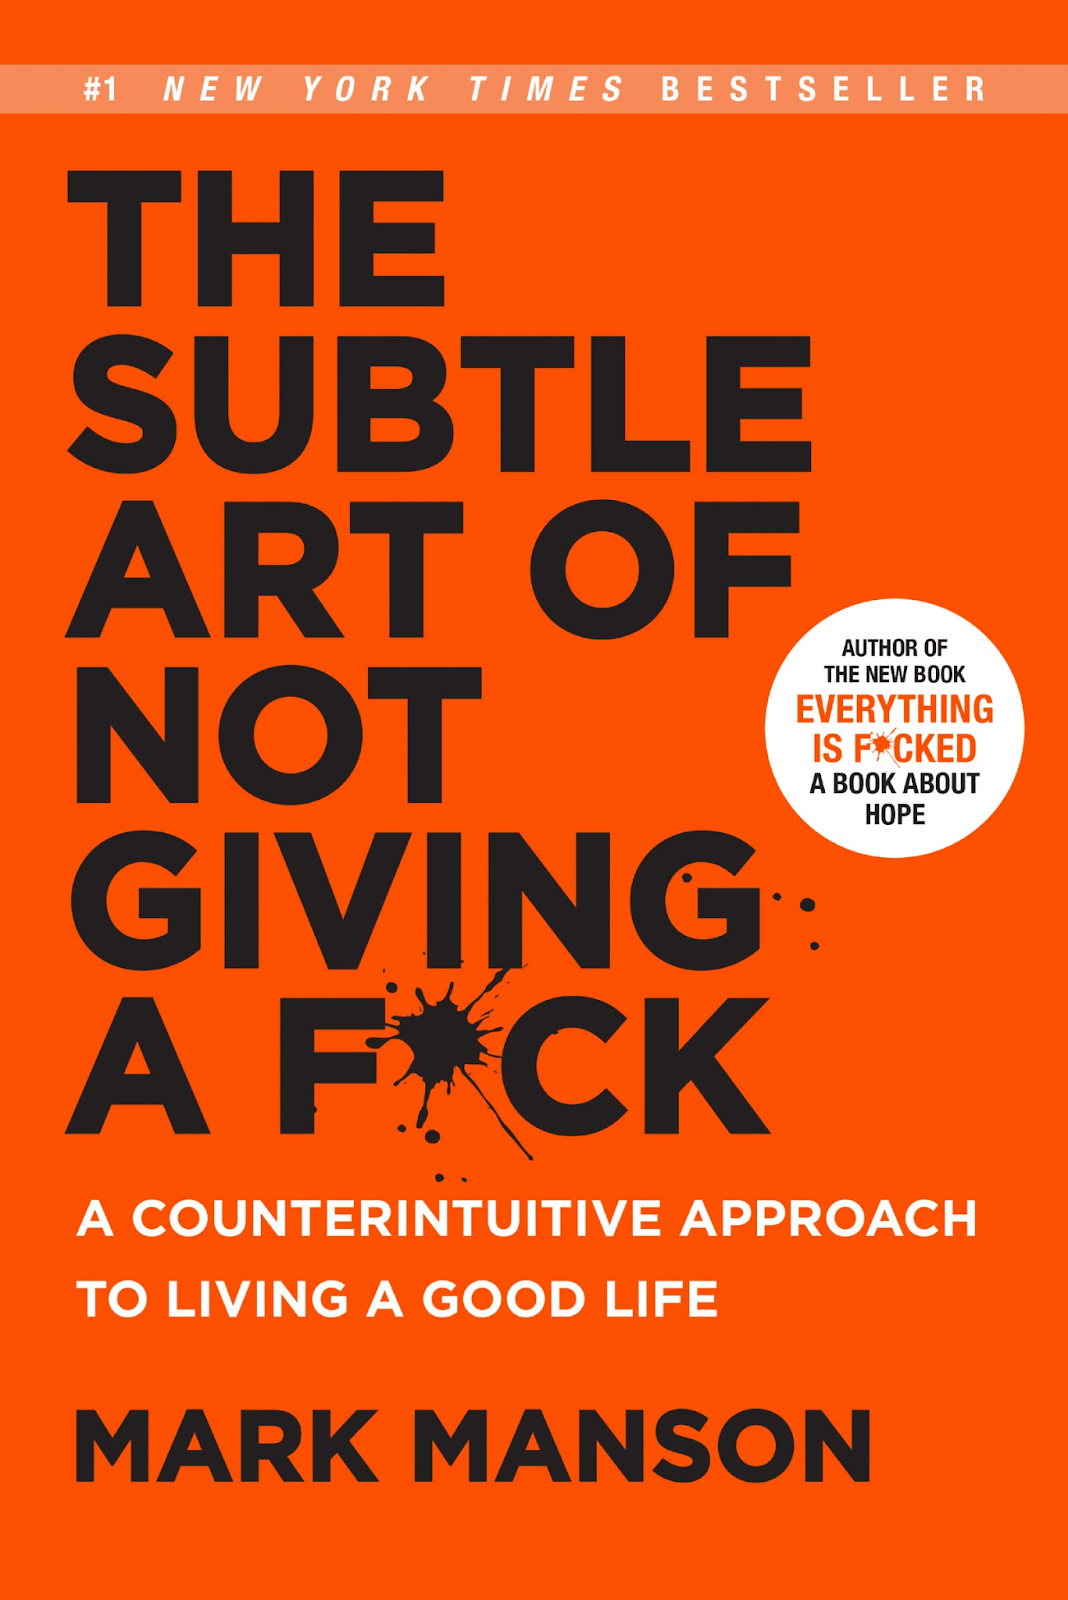 The Subtle Art of Not Giving a F*ck by Mark Manson book cover